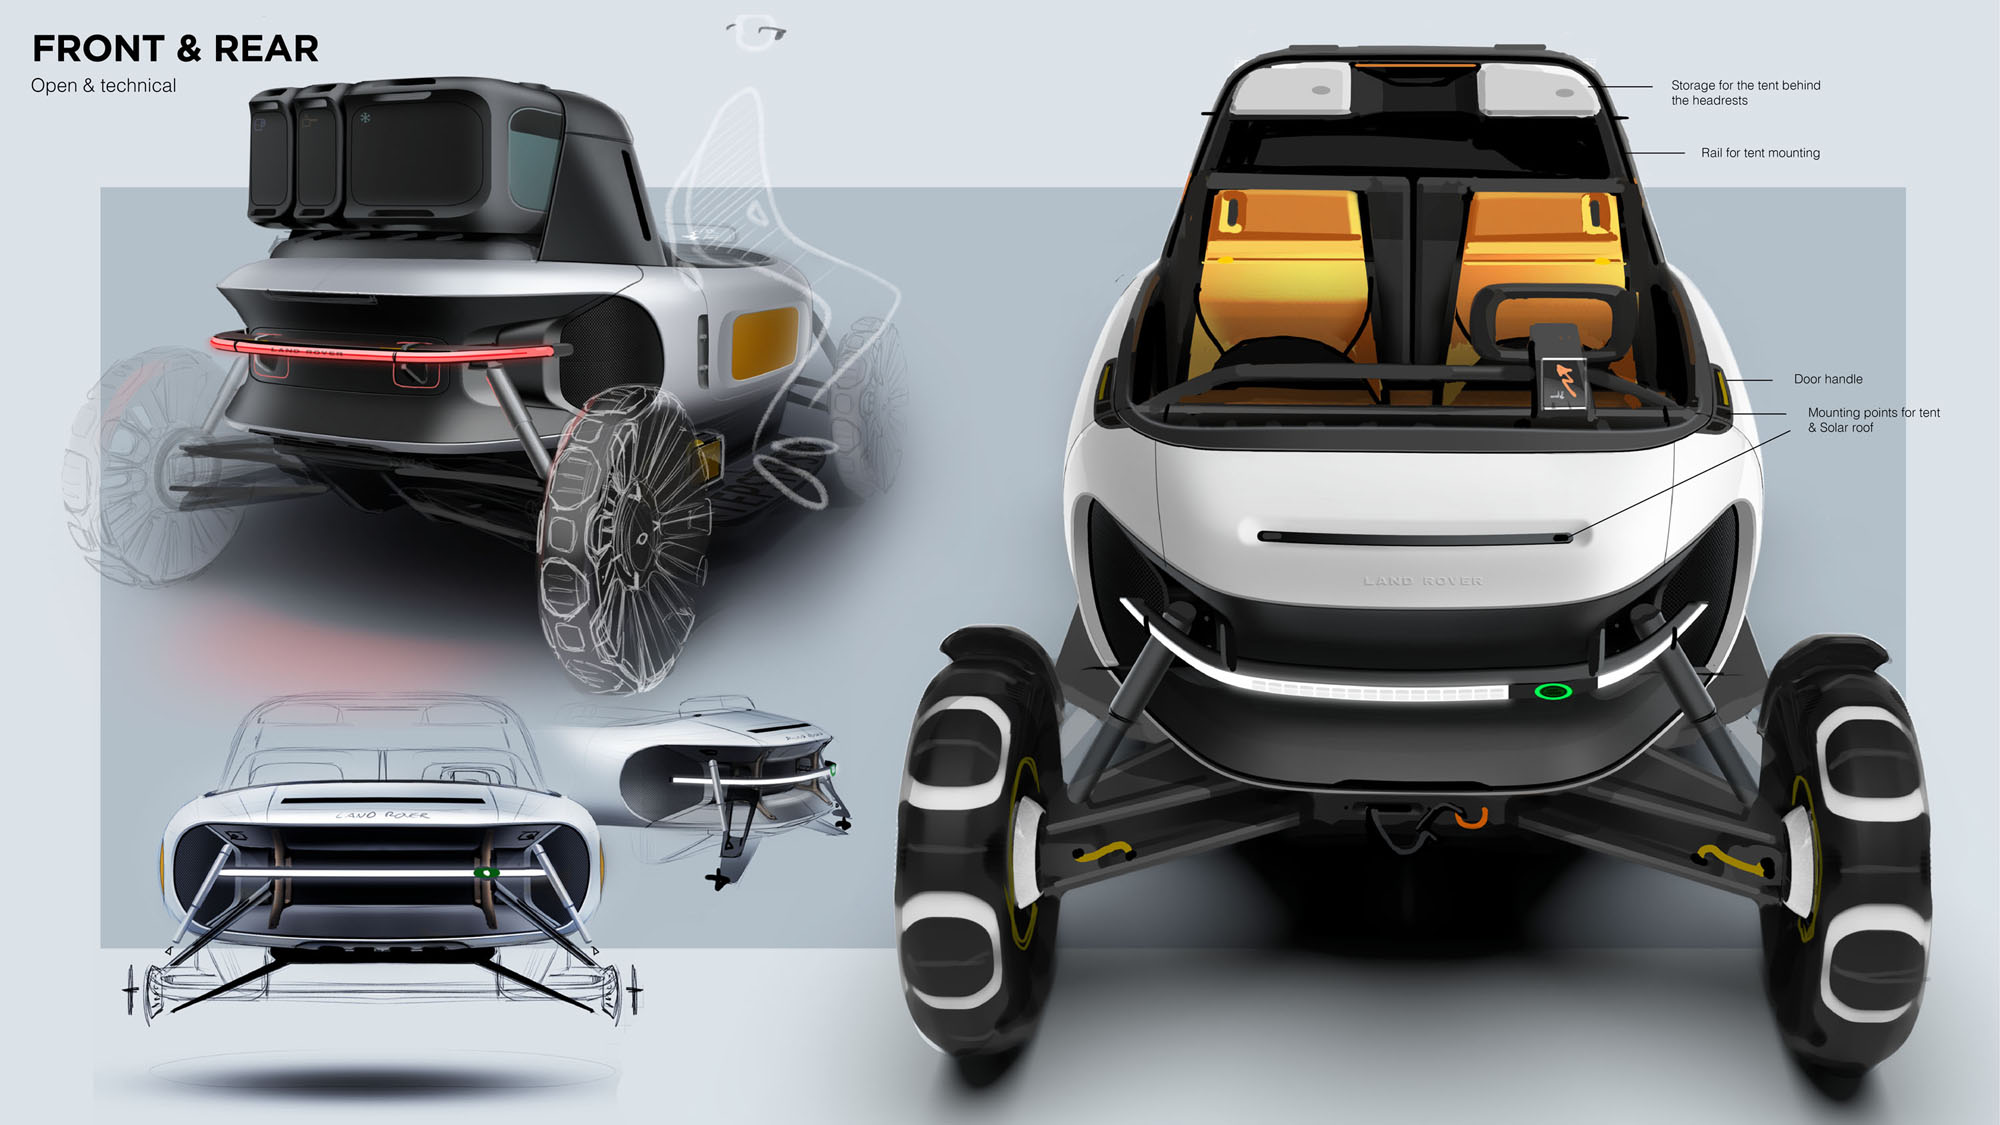 Land Rover Backpacker Concept Traveling Vehicle by Edwin Senger Tuvie